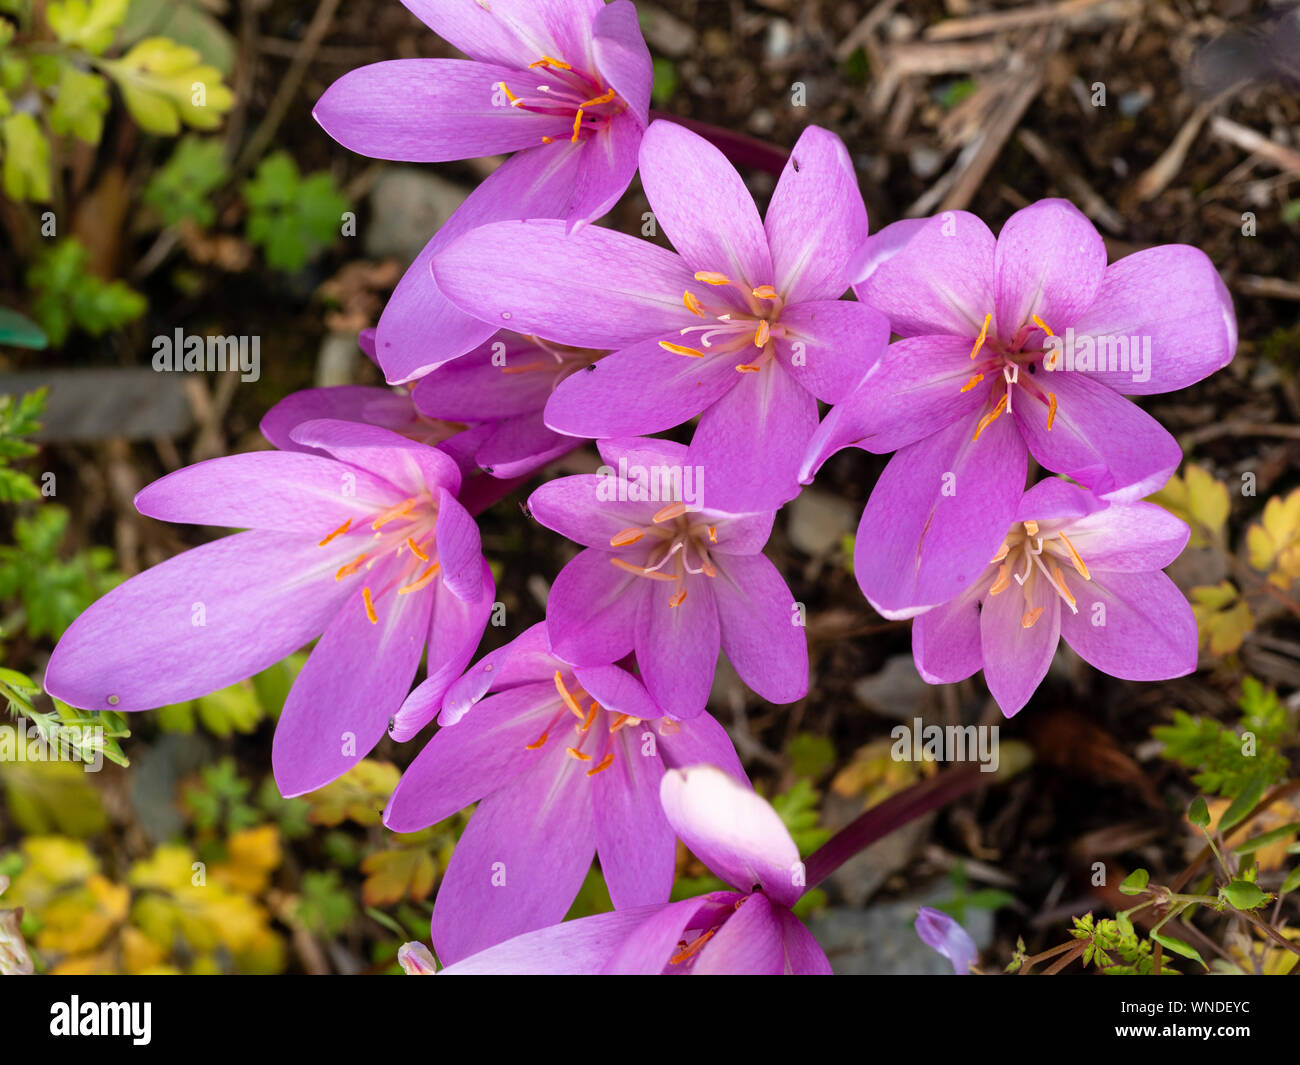 Overhead view of the pink flowers of autumn flowering meadow saffron, Colchicum autumnale 'Nancy Lindsay' Stock Photo